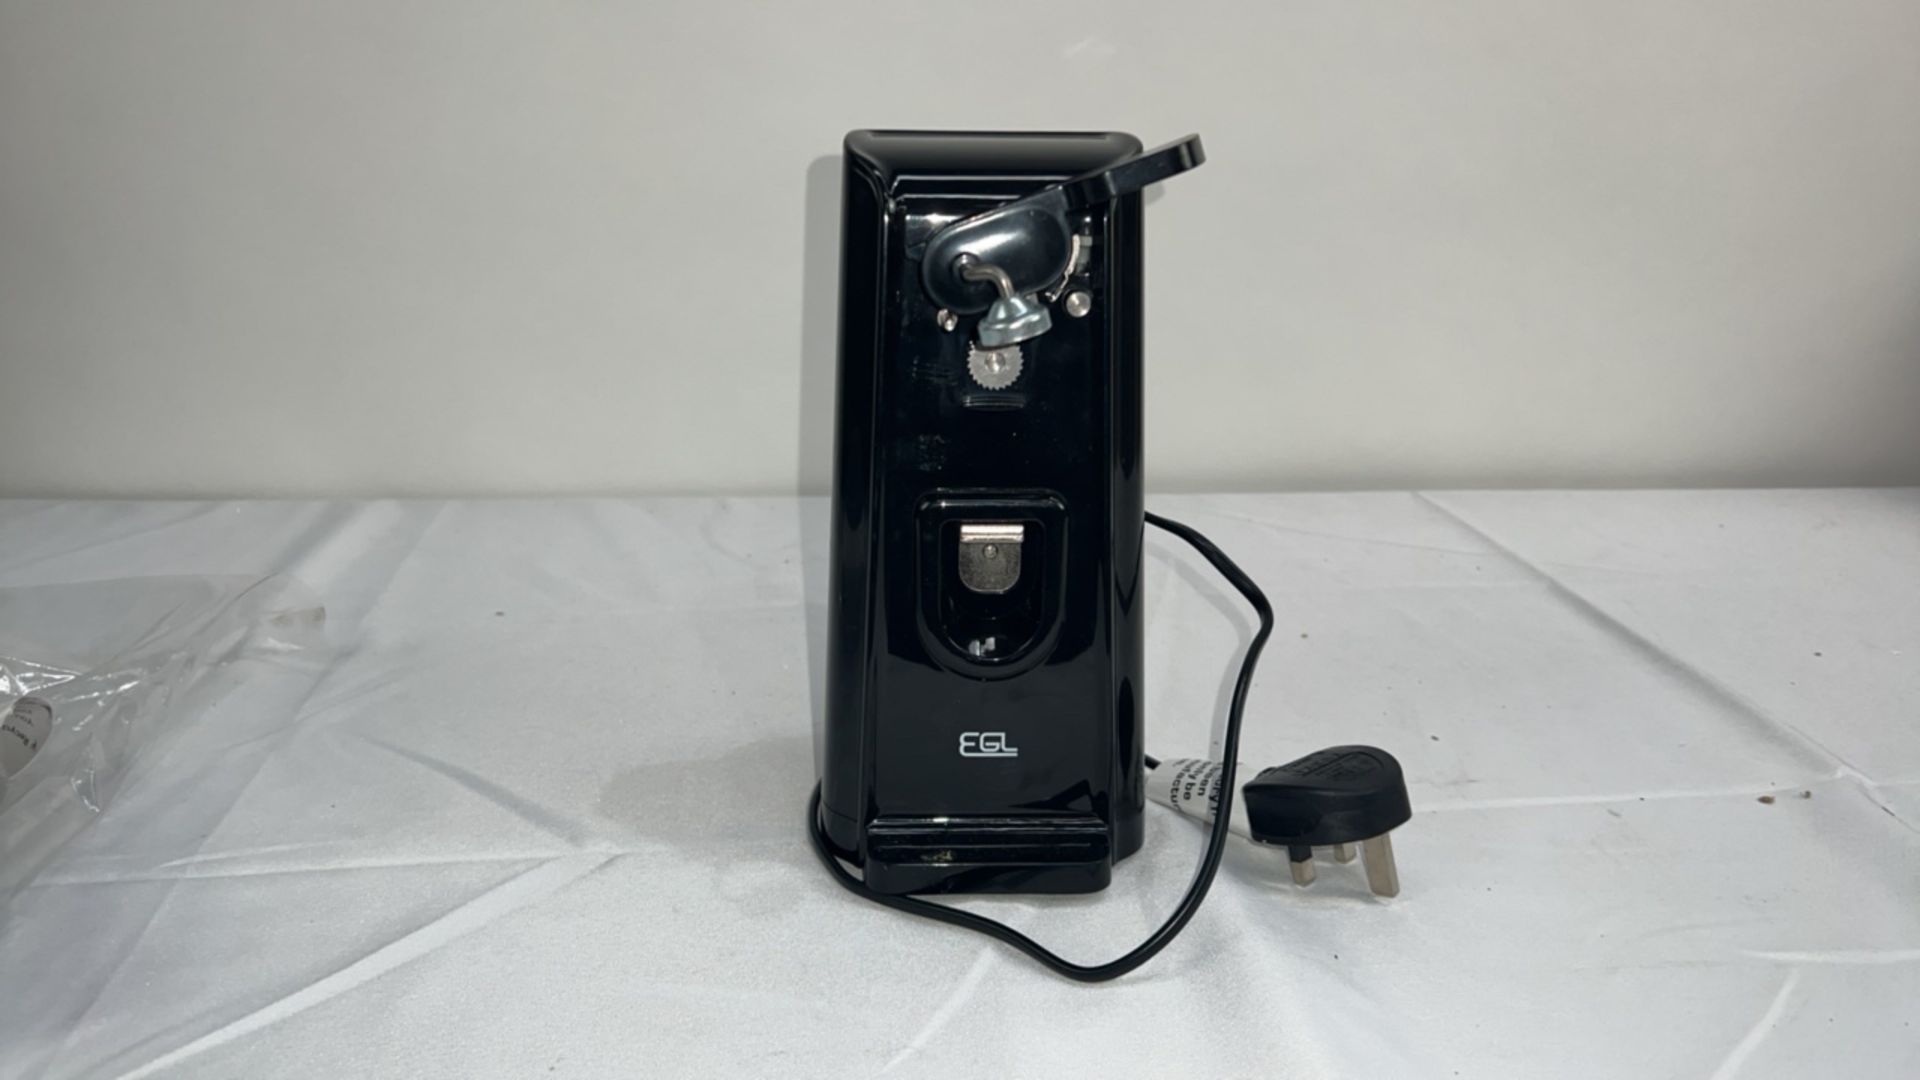 EGL 3IN1 CAN OPENER - Image 3 of 3